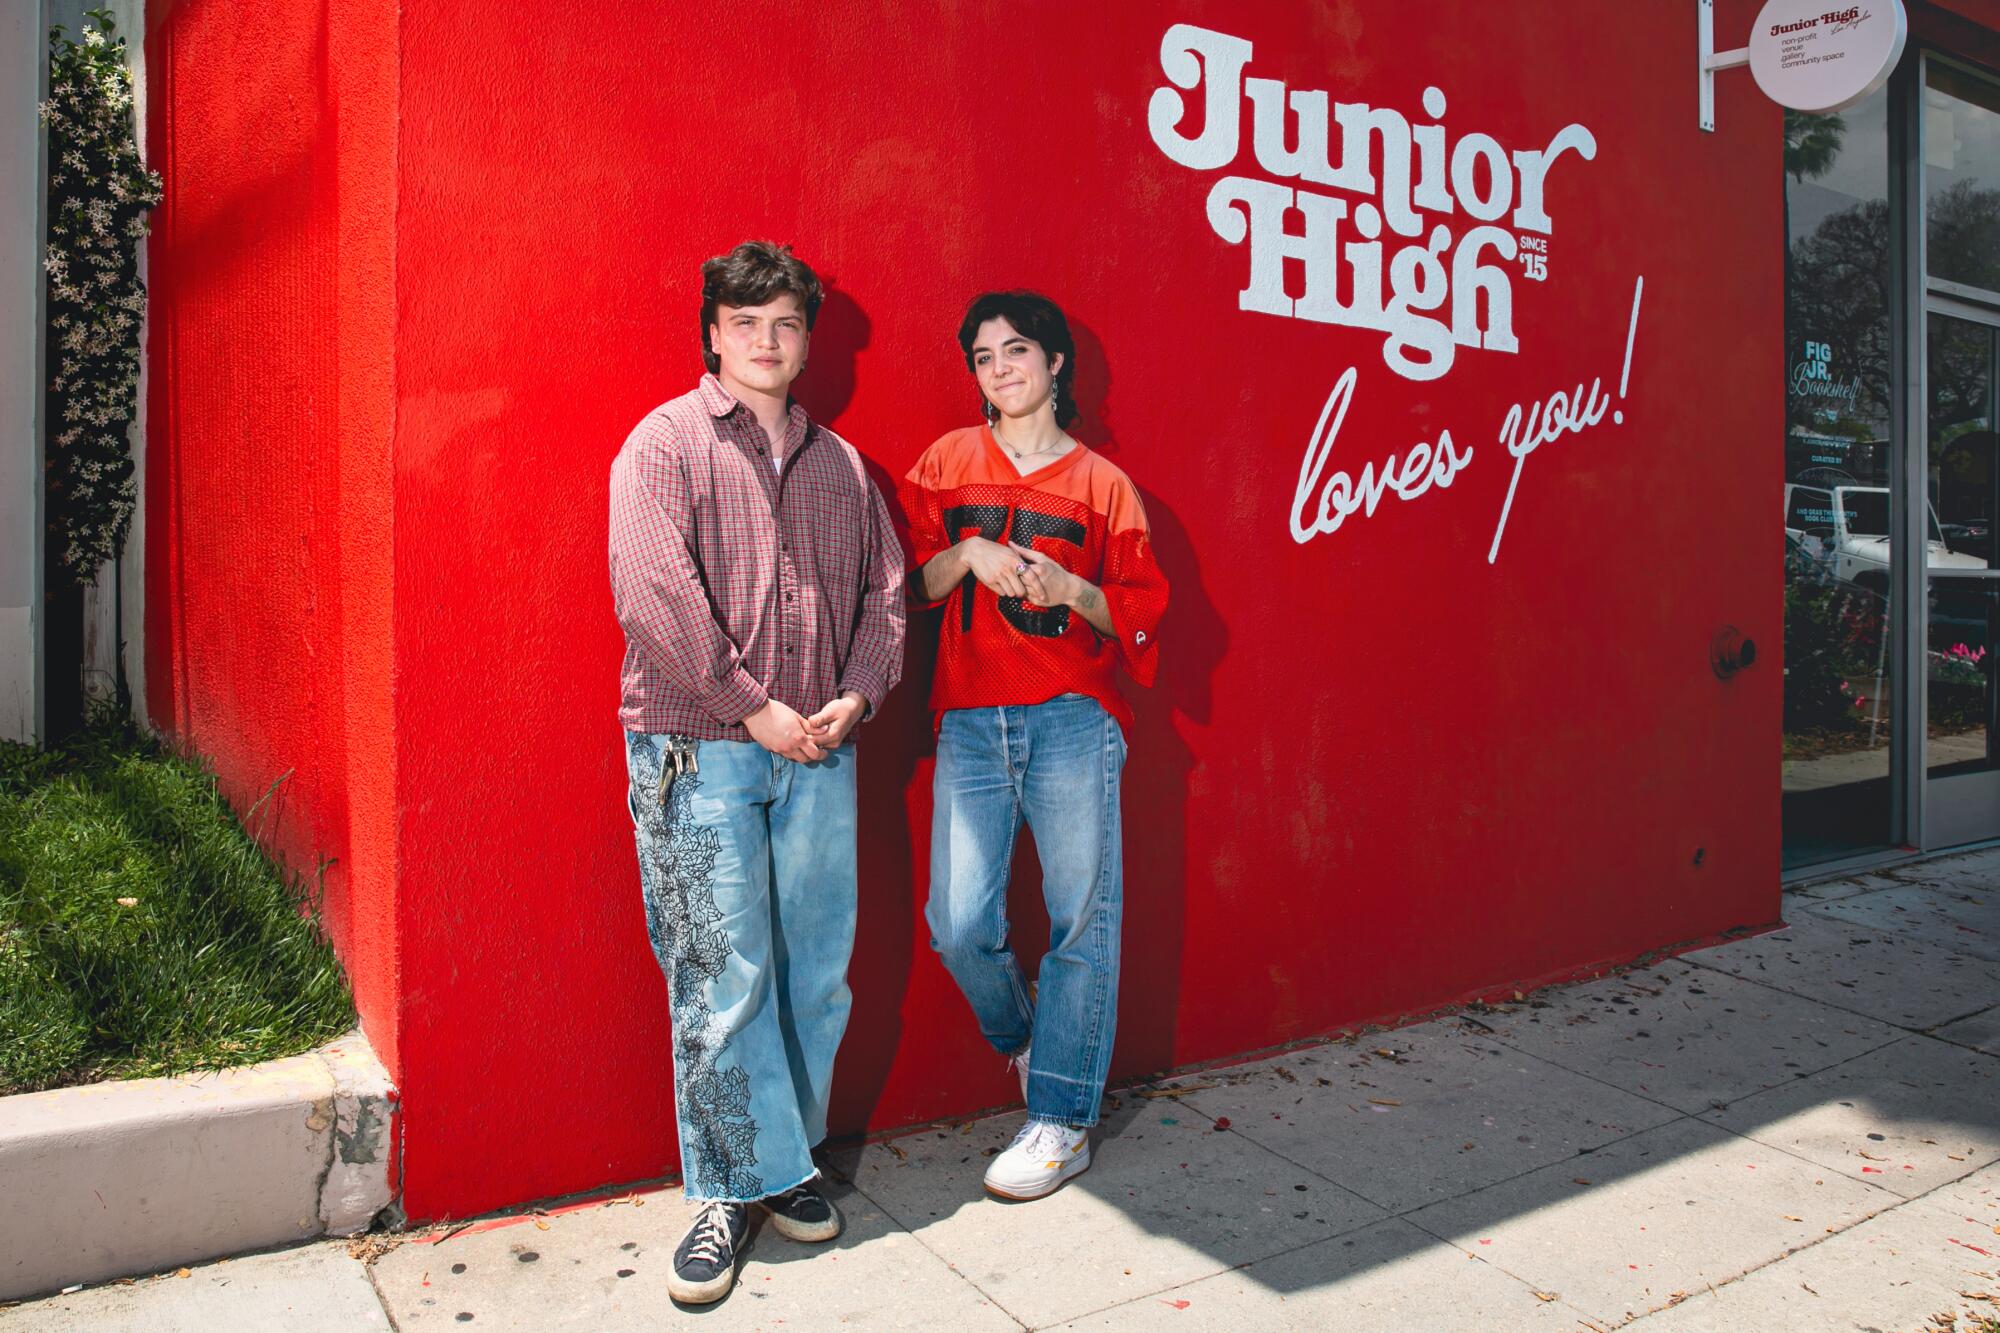 Two people stand for a portrait in front of a red wall with the words "Junior High loves you!"